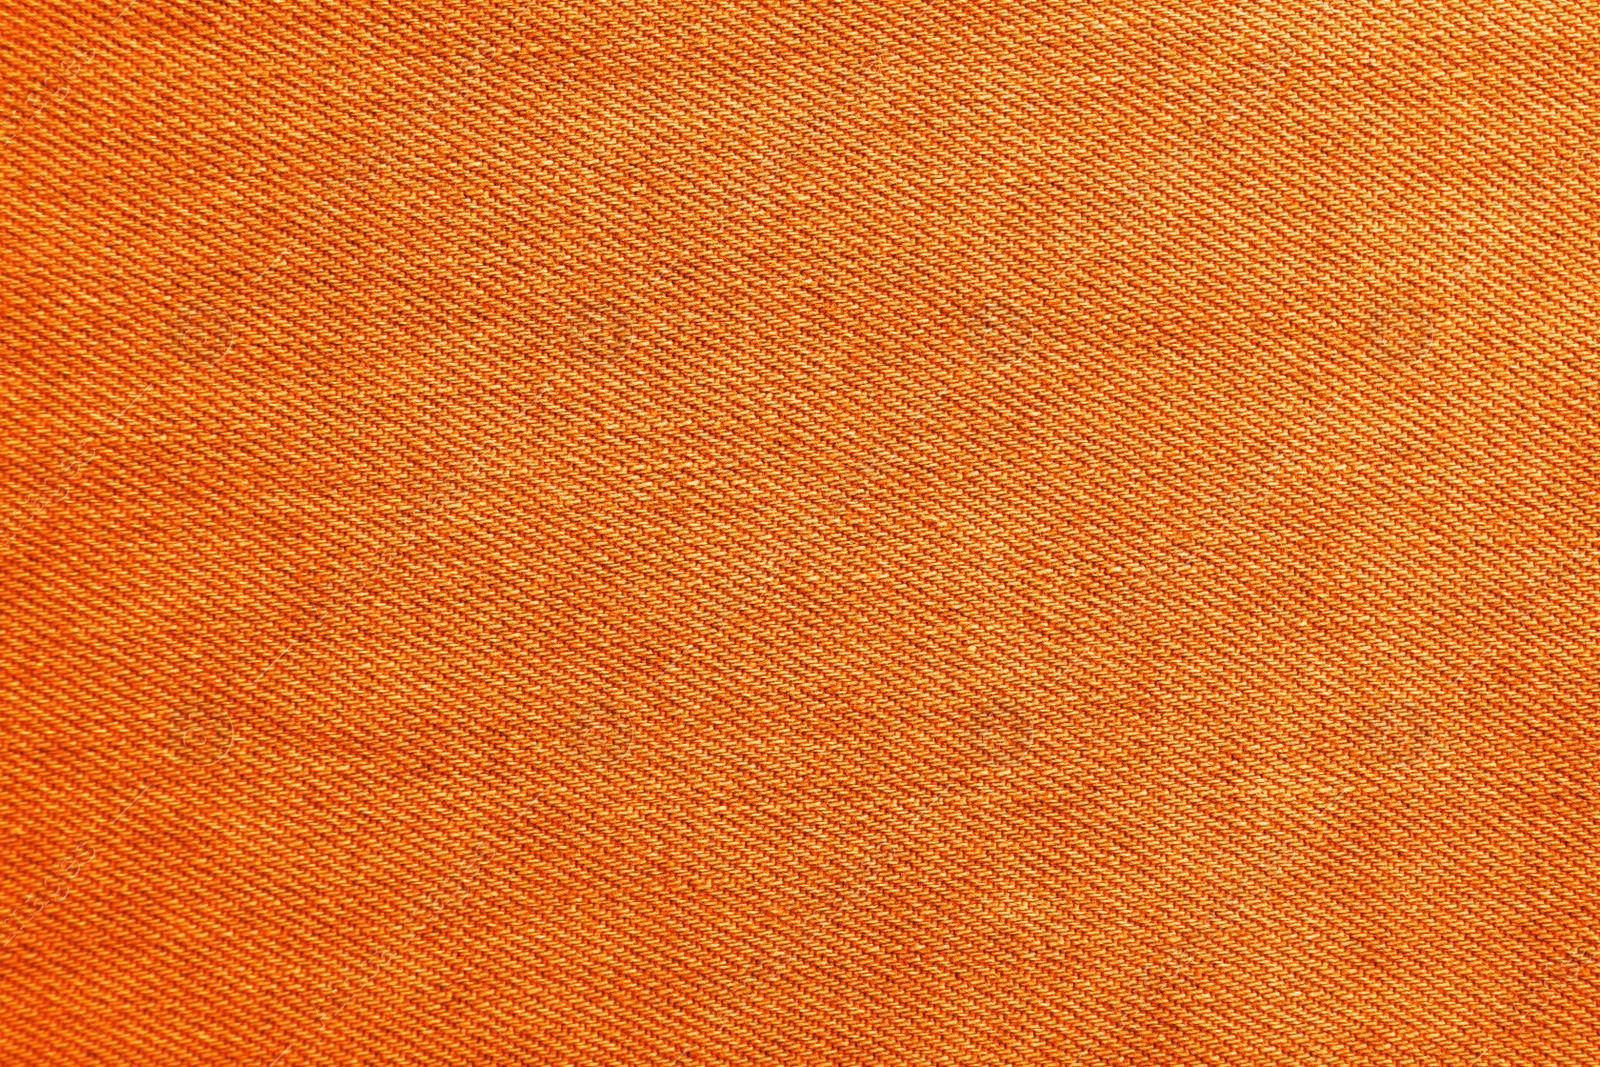 Image of Texture of orange jeans as background, closeup